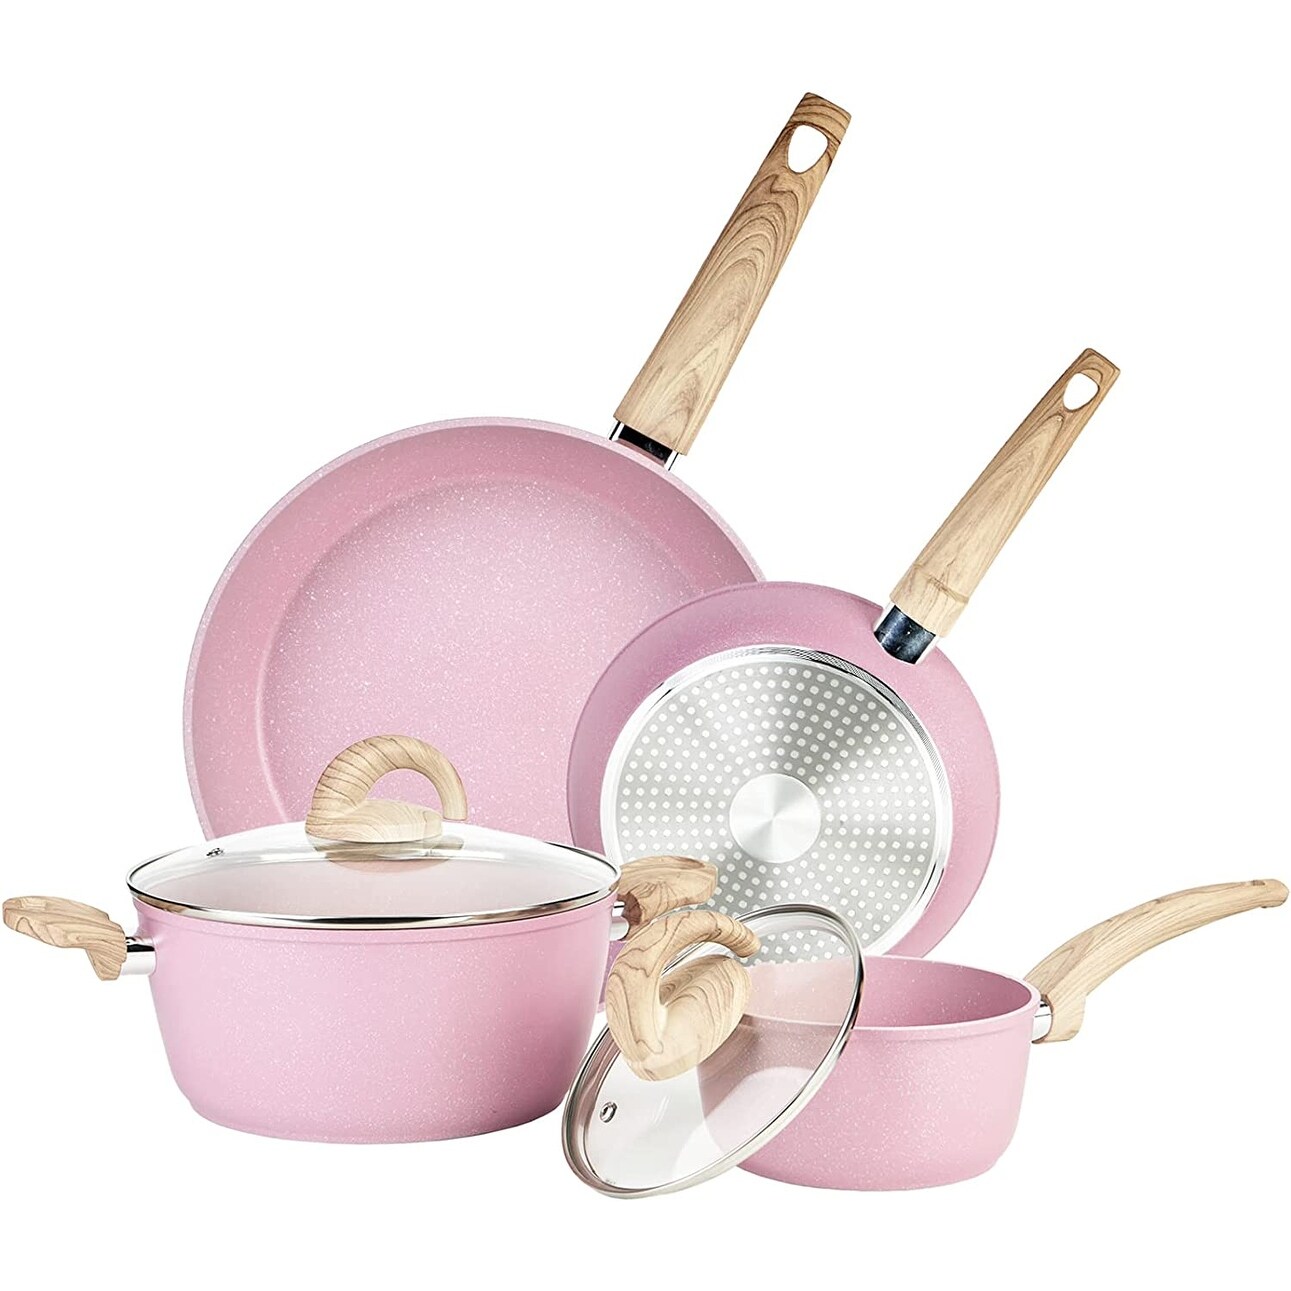 Vkoocy Pink Pots and Pans Set Non Stick, Ceramic Cookware Set Kitchen Cooking Sets Induction Granite Pot and Pan w/Frying Pans, Saucepans, Casserole